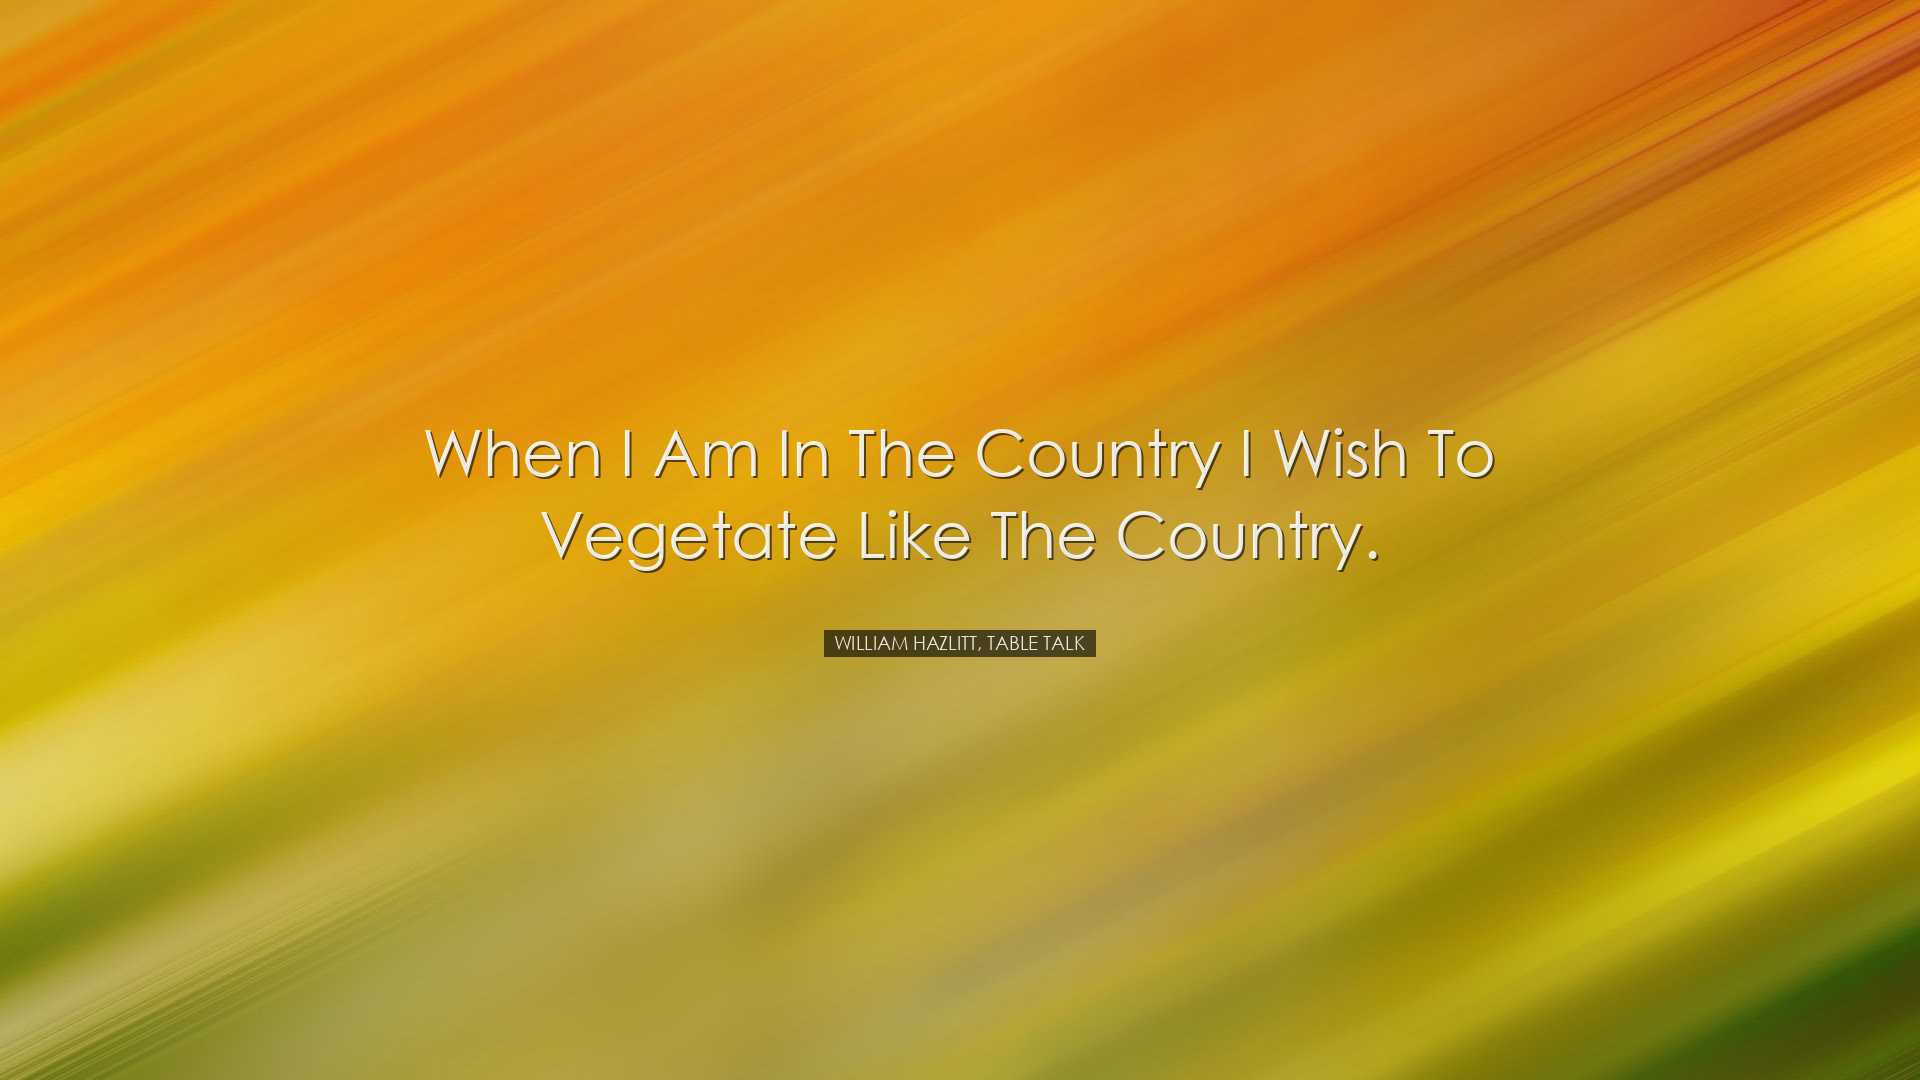 When I am in the country I wish to vegetate like the country. - Wi